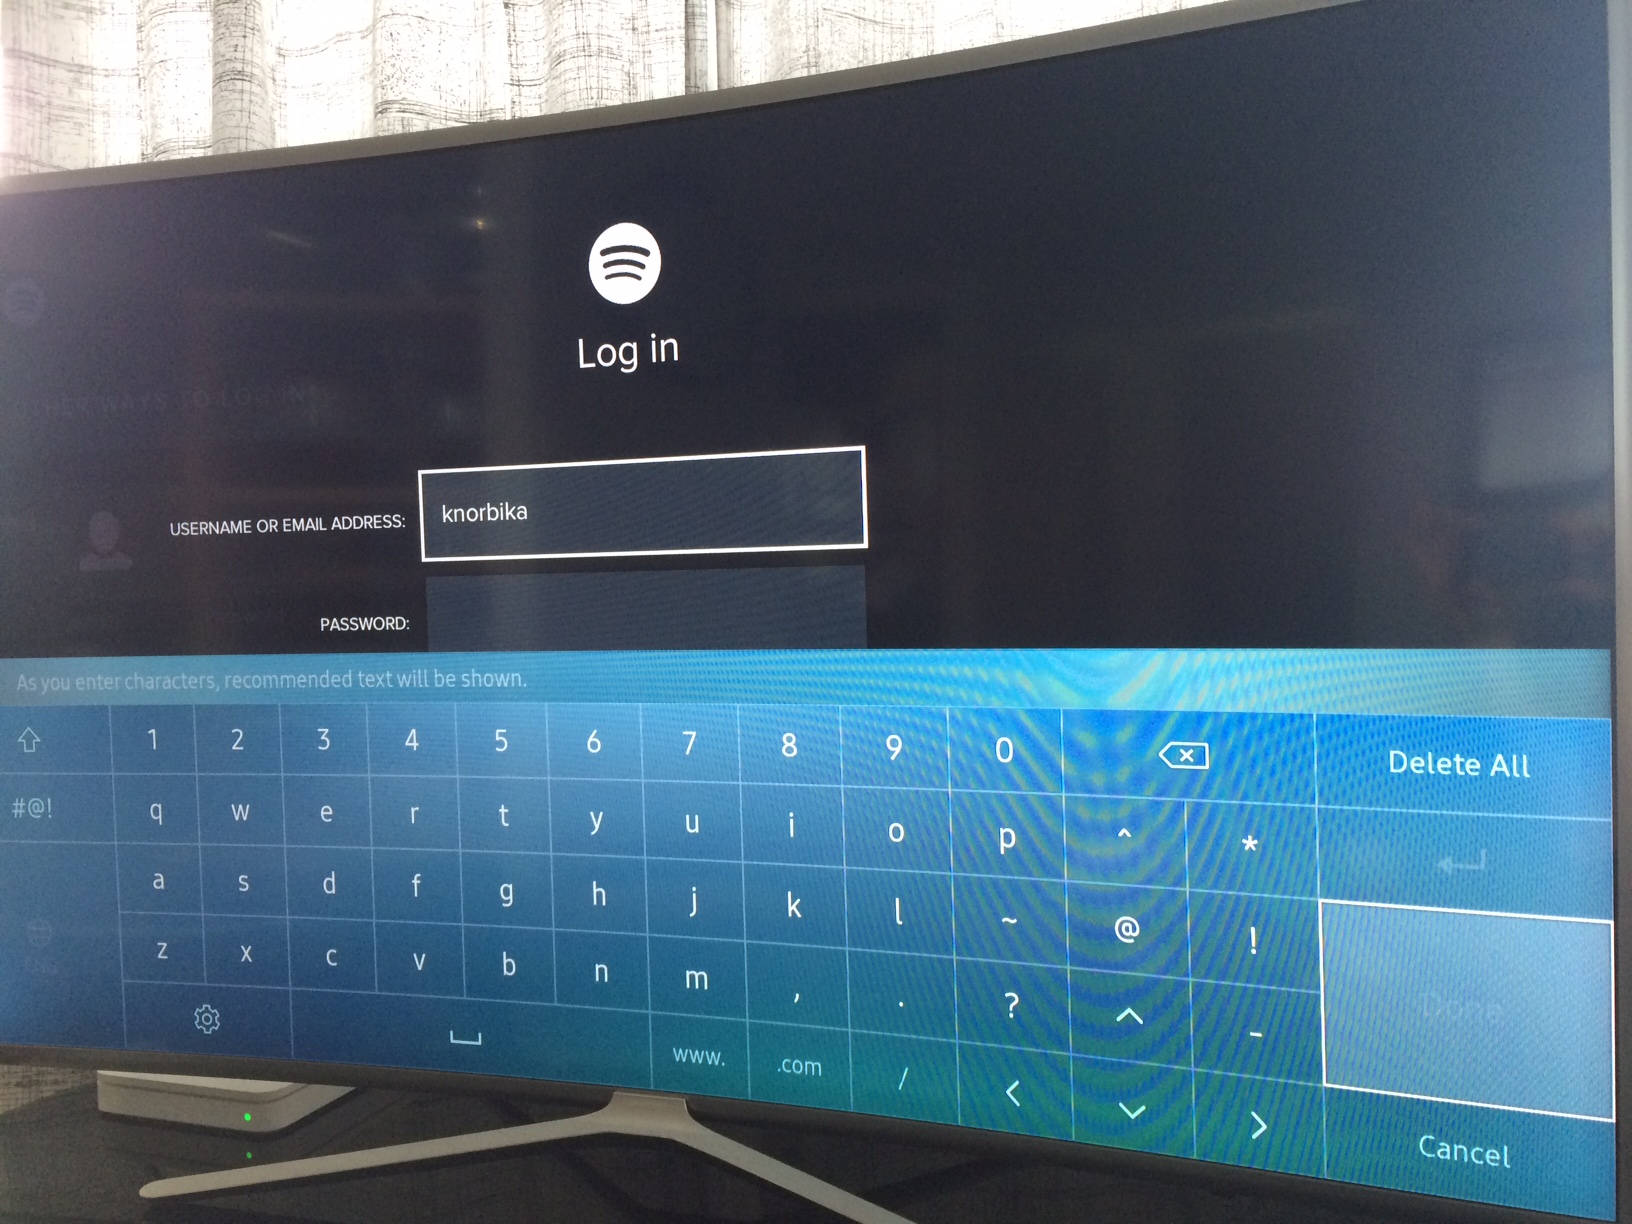 Samsung Smart LED TV - UN55K6250AFXZC log-in issue - The Spotify Community